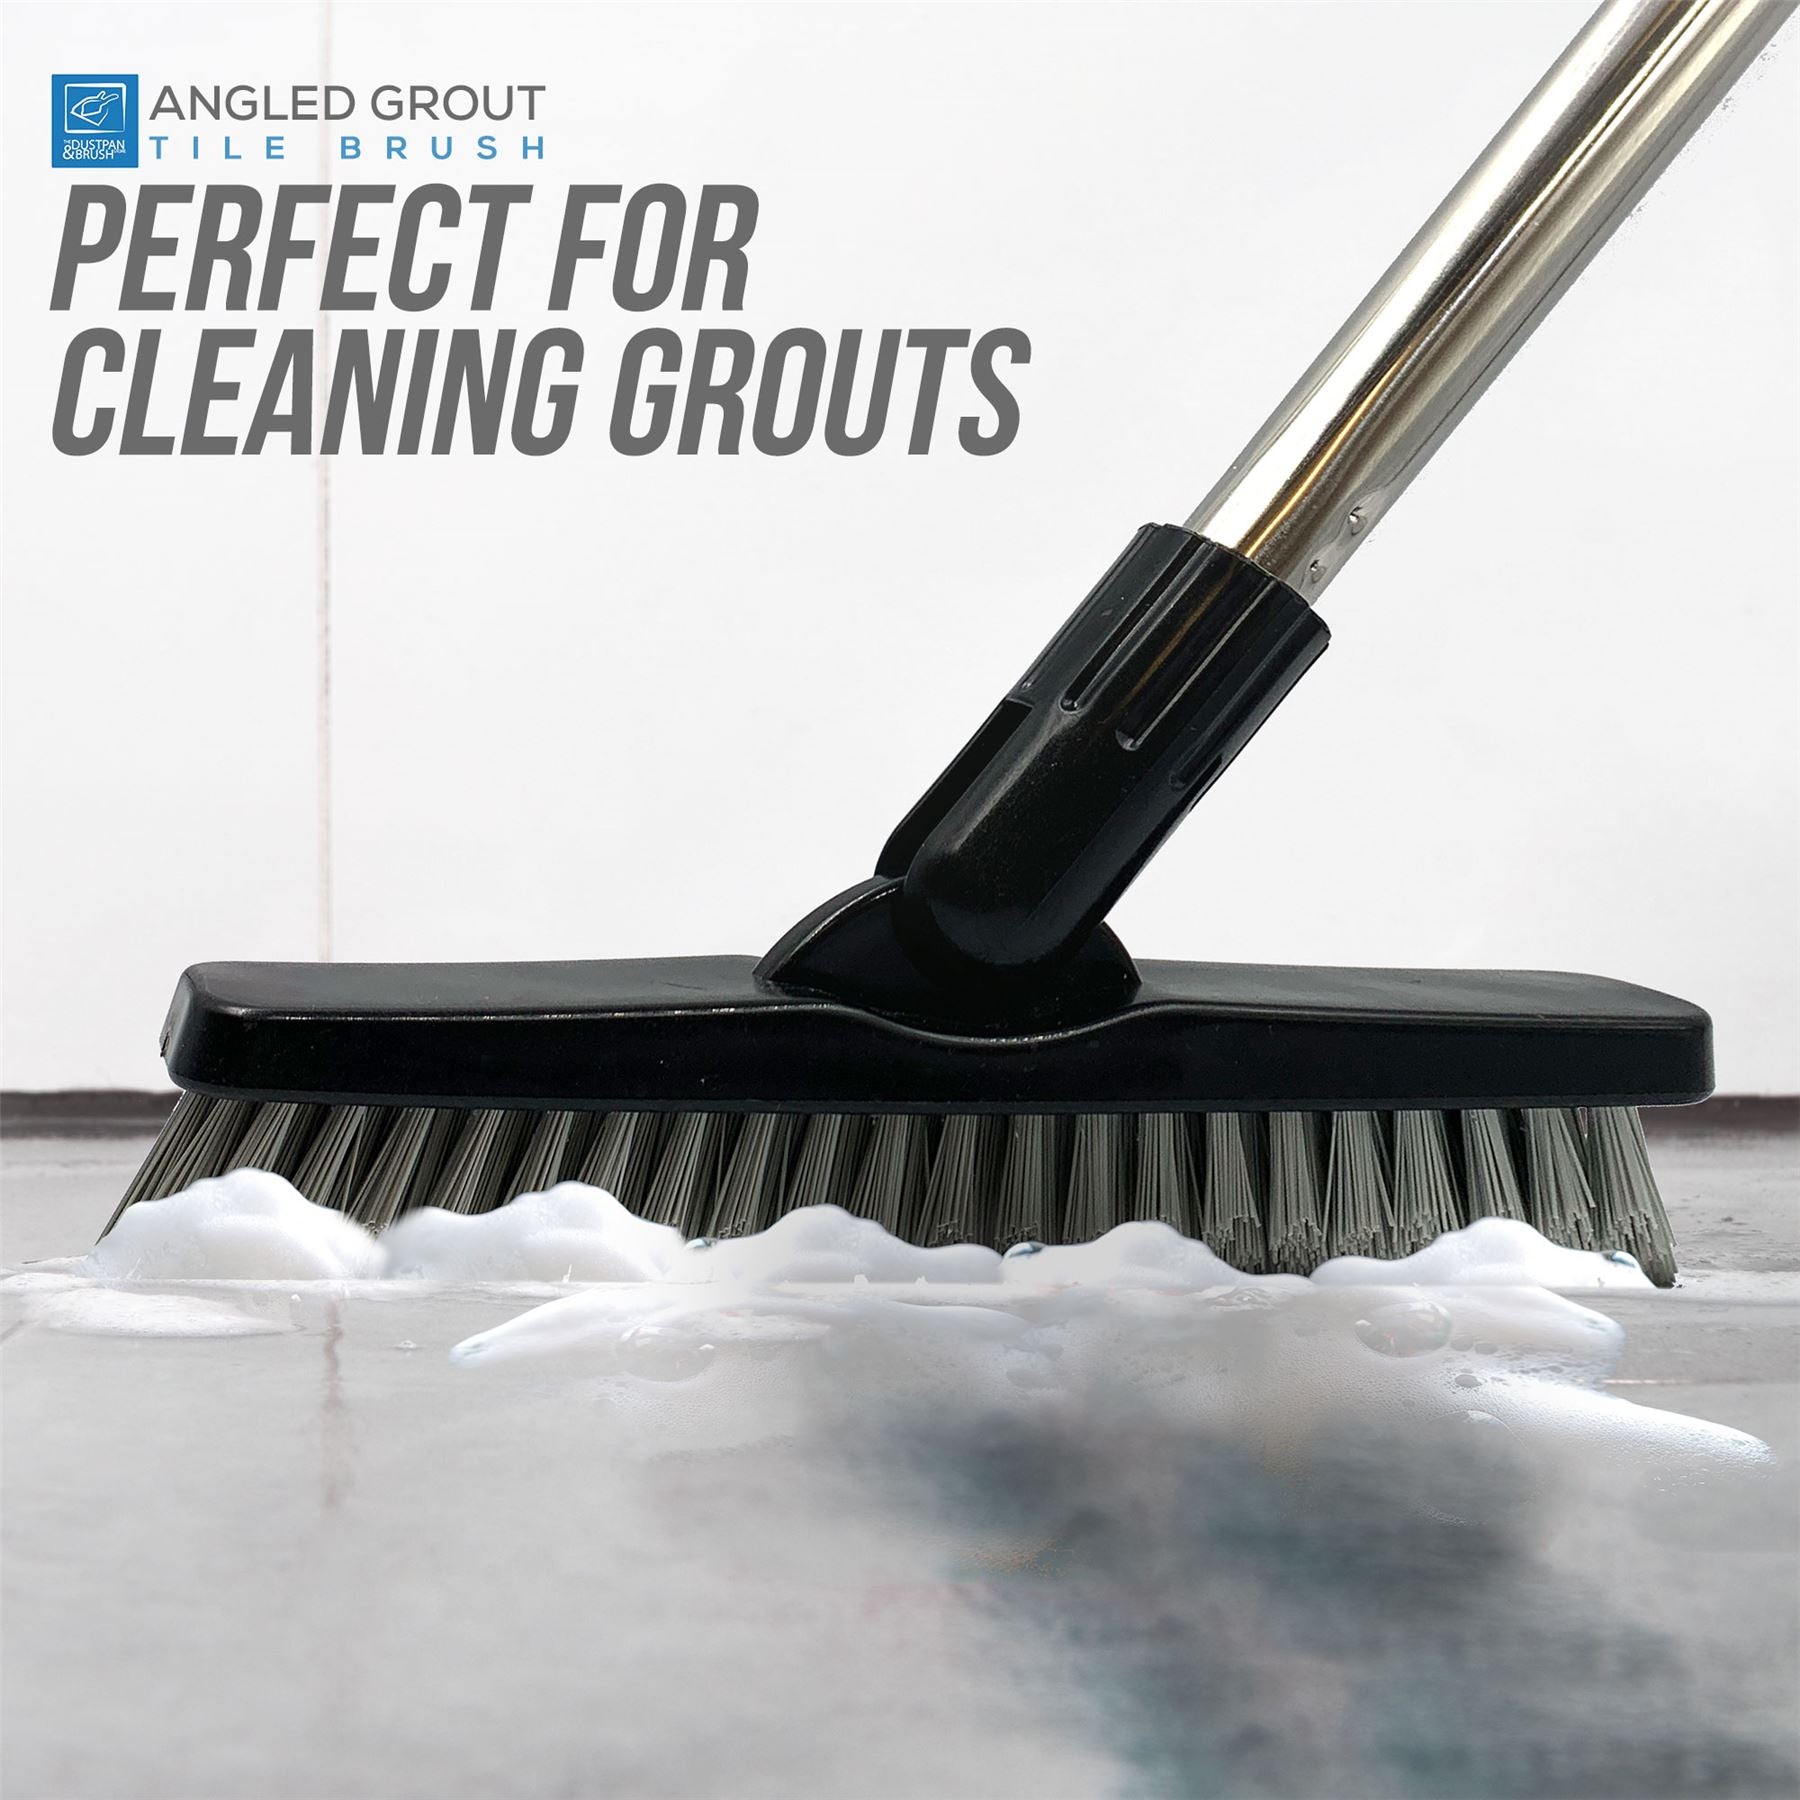 Angled Grout Floor Scrubbing Brush and Stainless Steel Handle